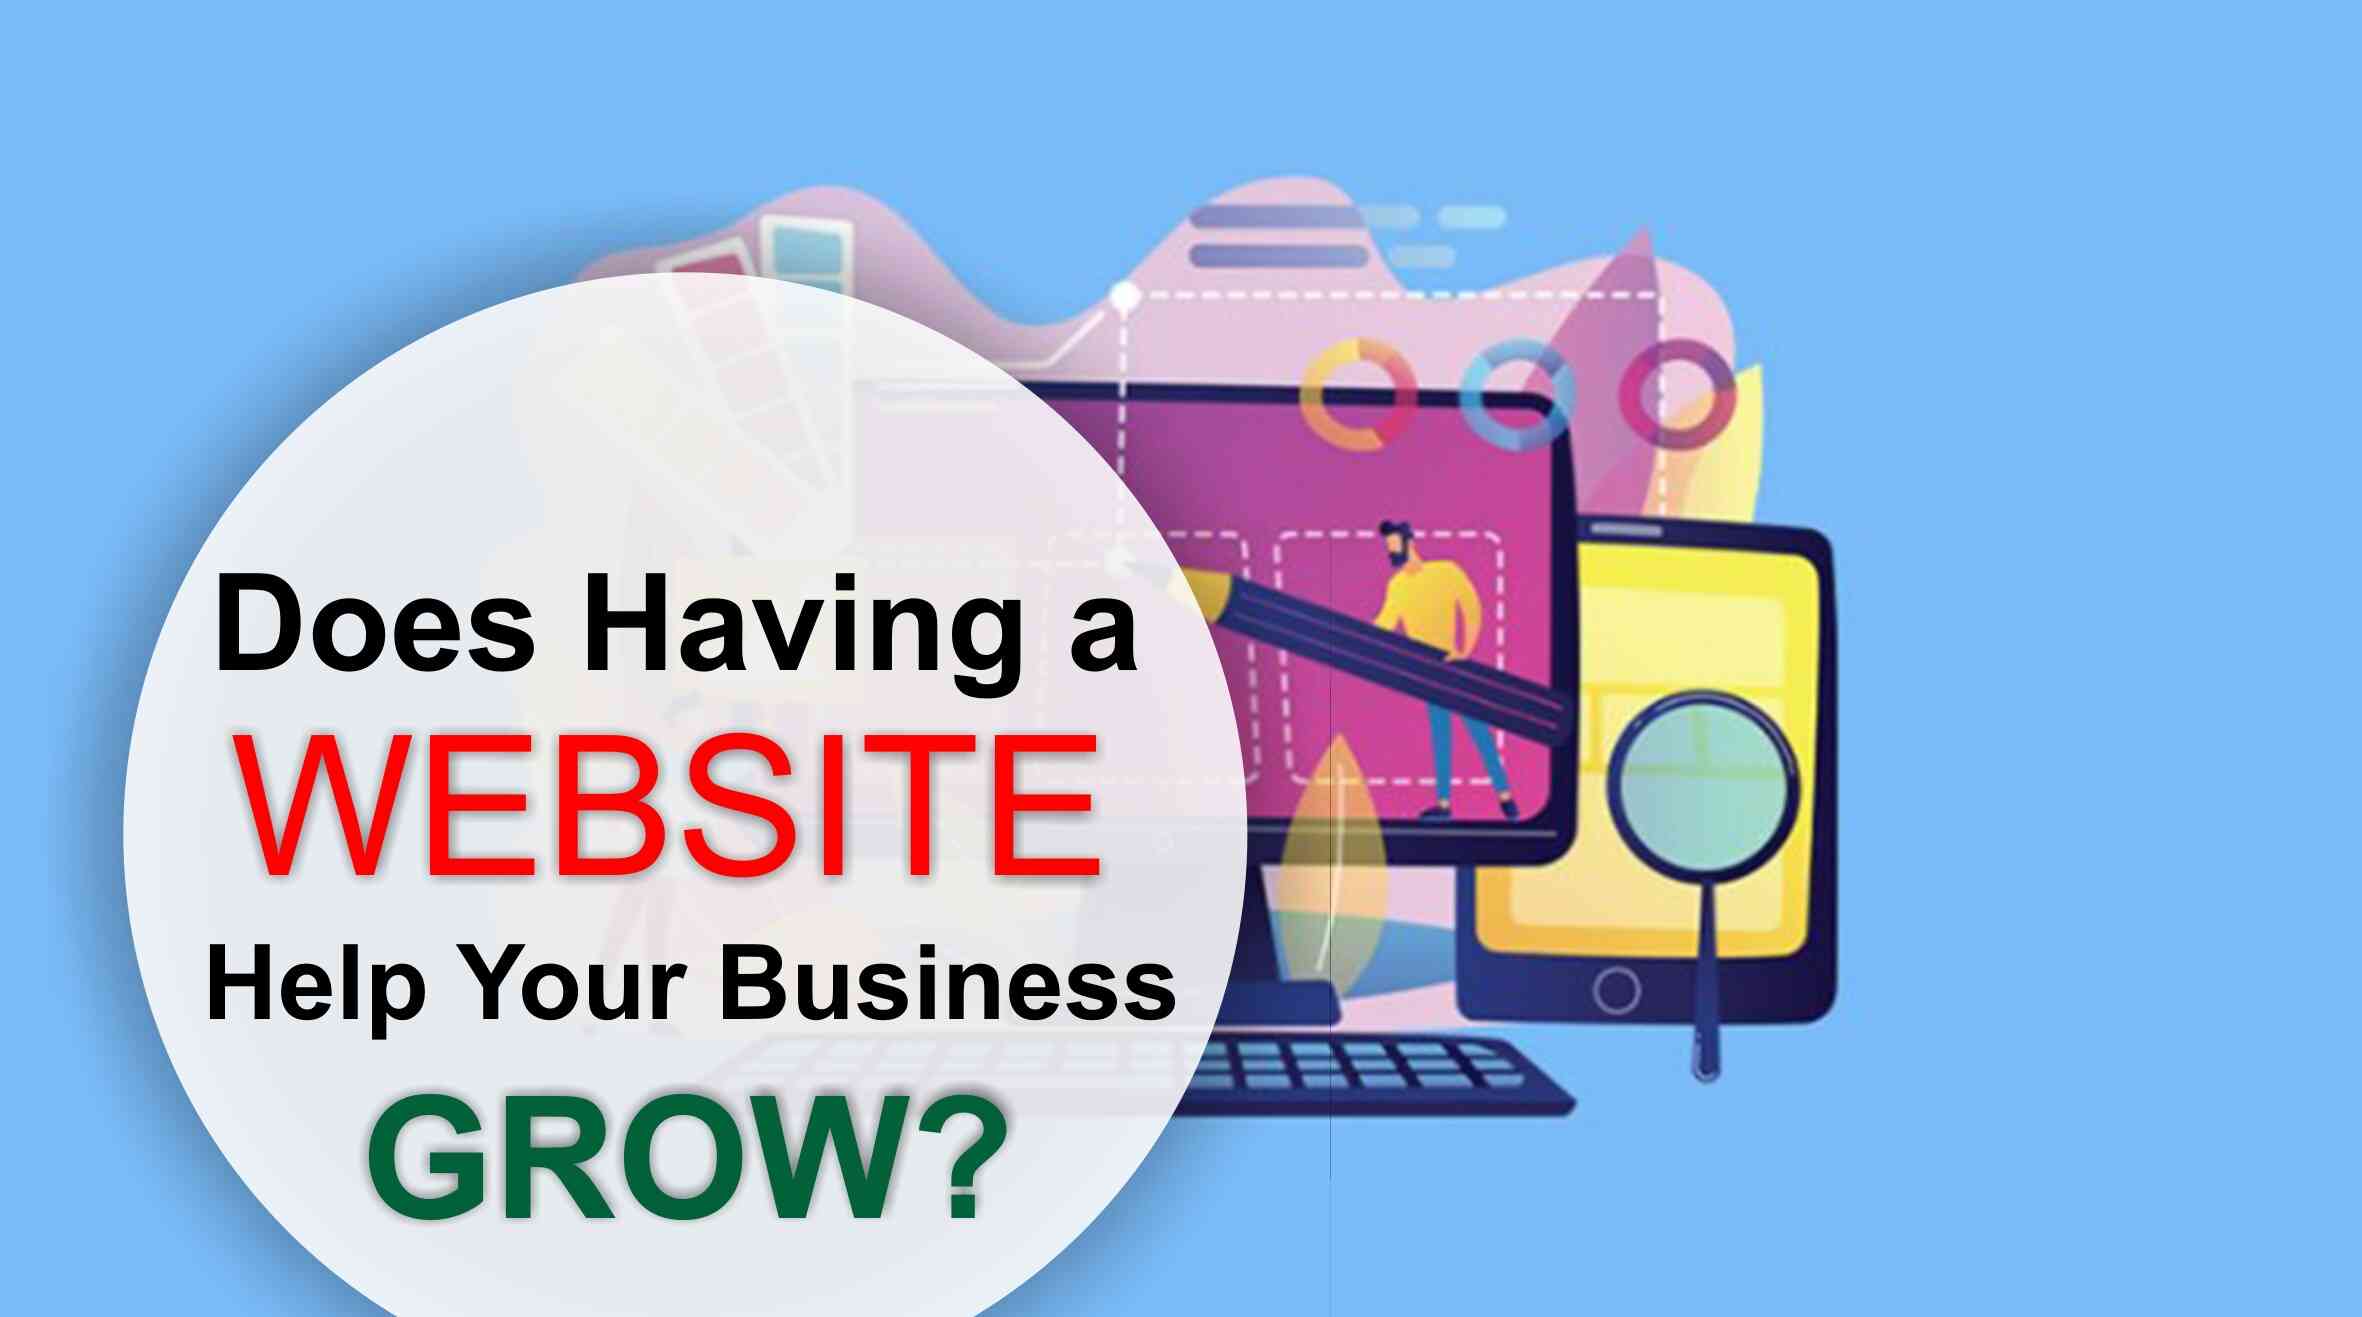 Does Having a Website Help Your Business Grow? Some reasons why website can help grow your business